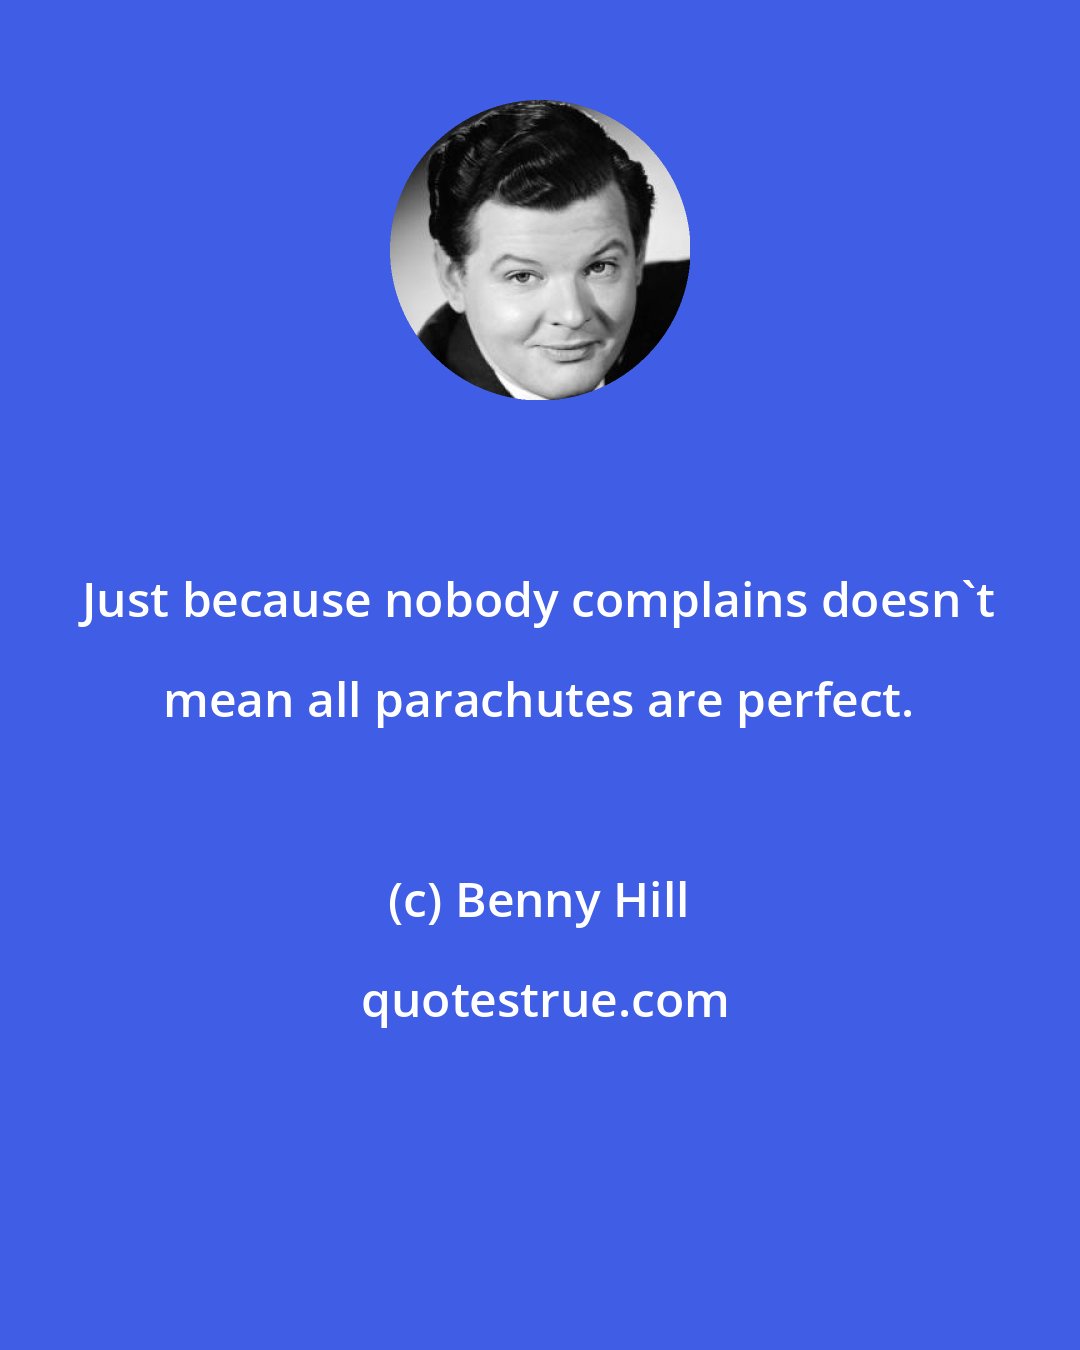 Benny Hill: Just because nobody complains doesn't mean all parachutes are perfect.